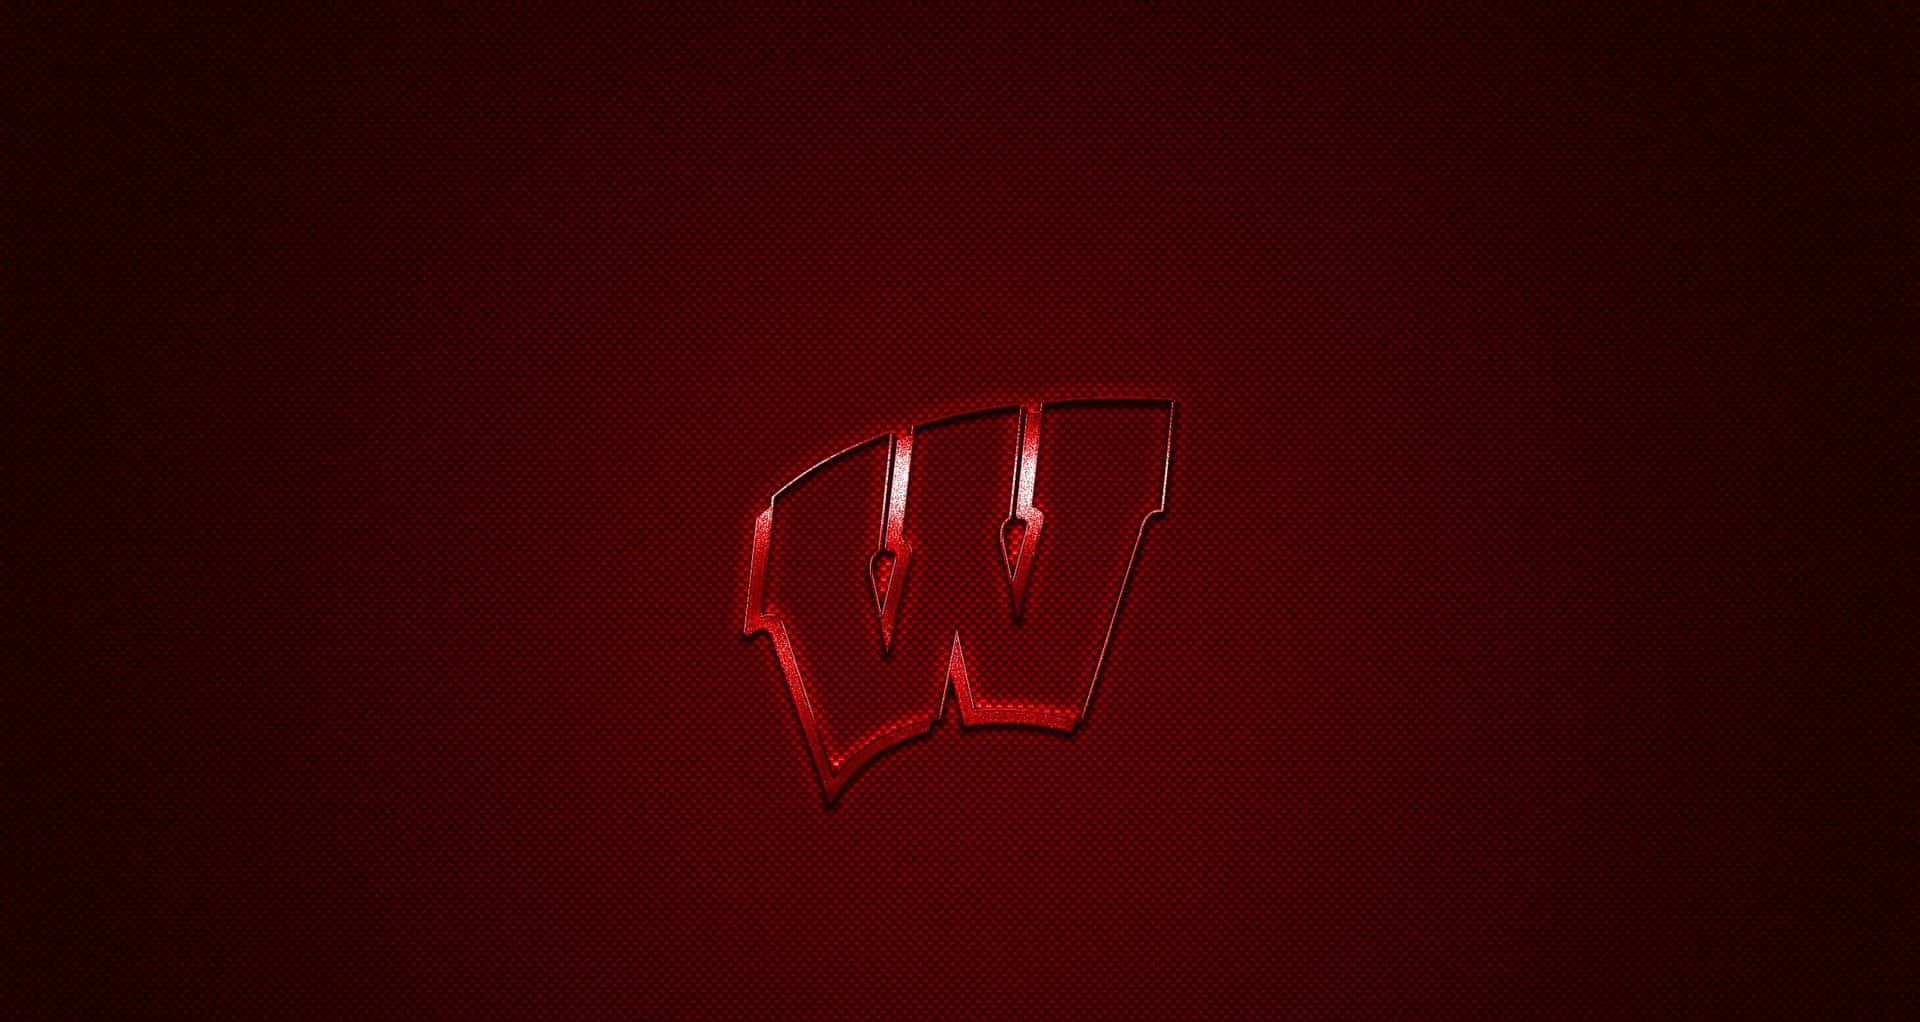 Caption: Wisconsin Badgers football team in action Wallpaper